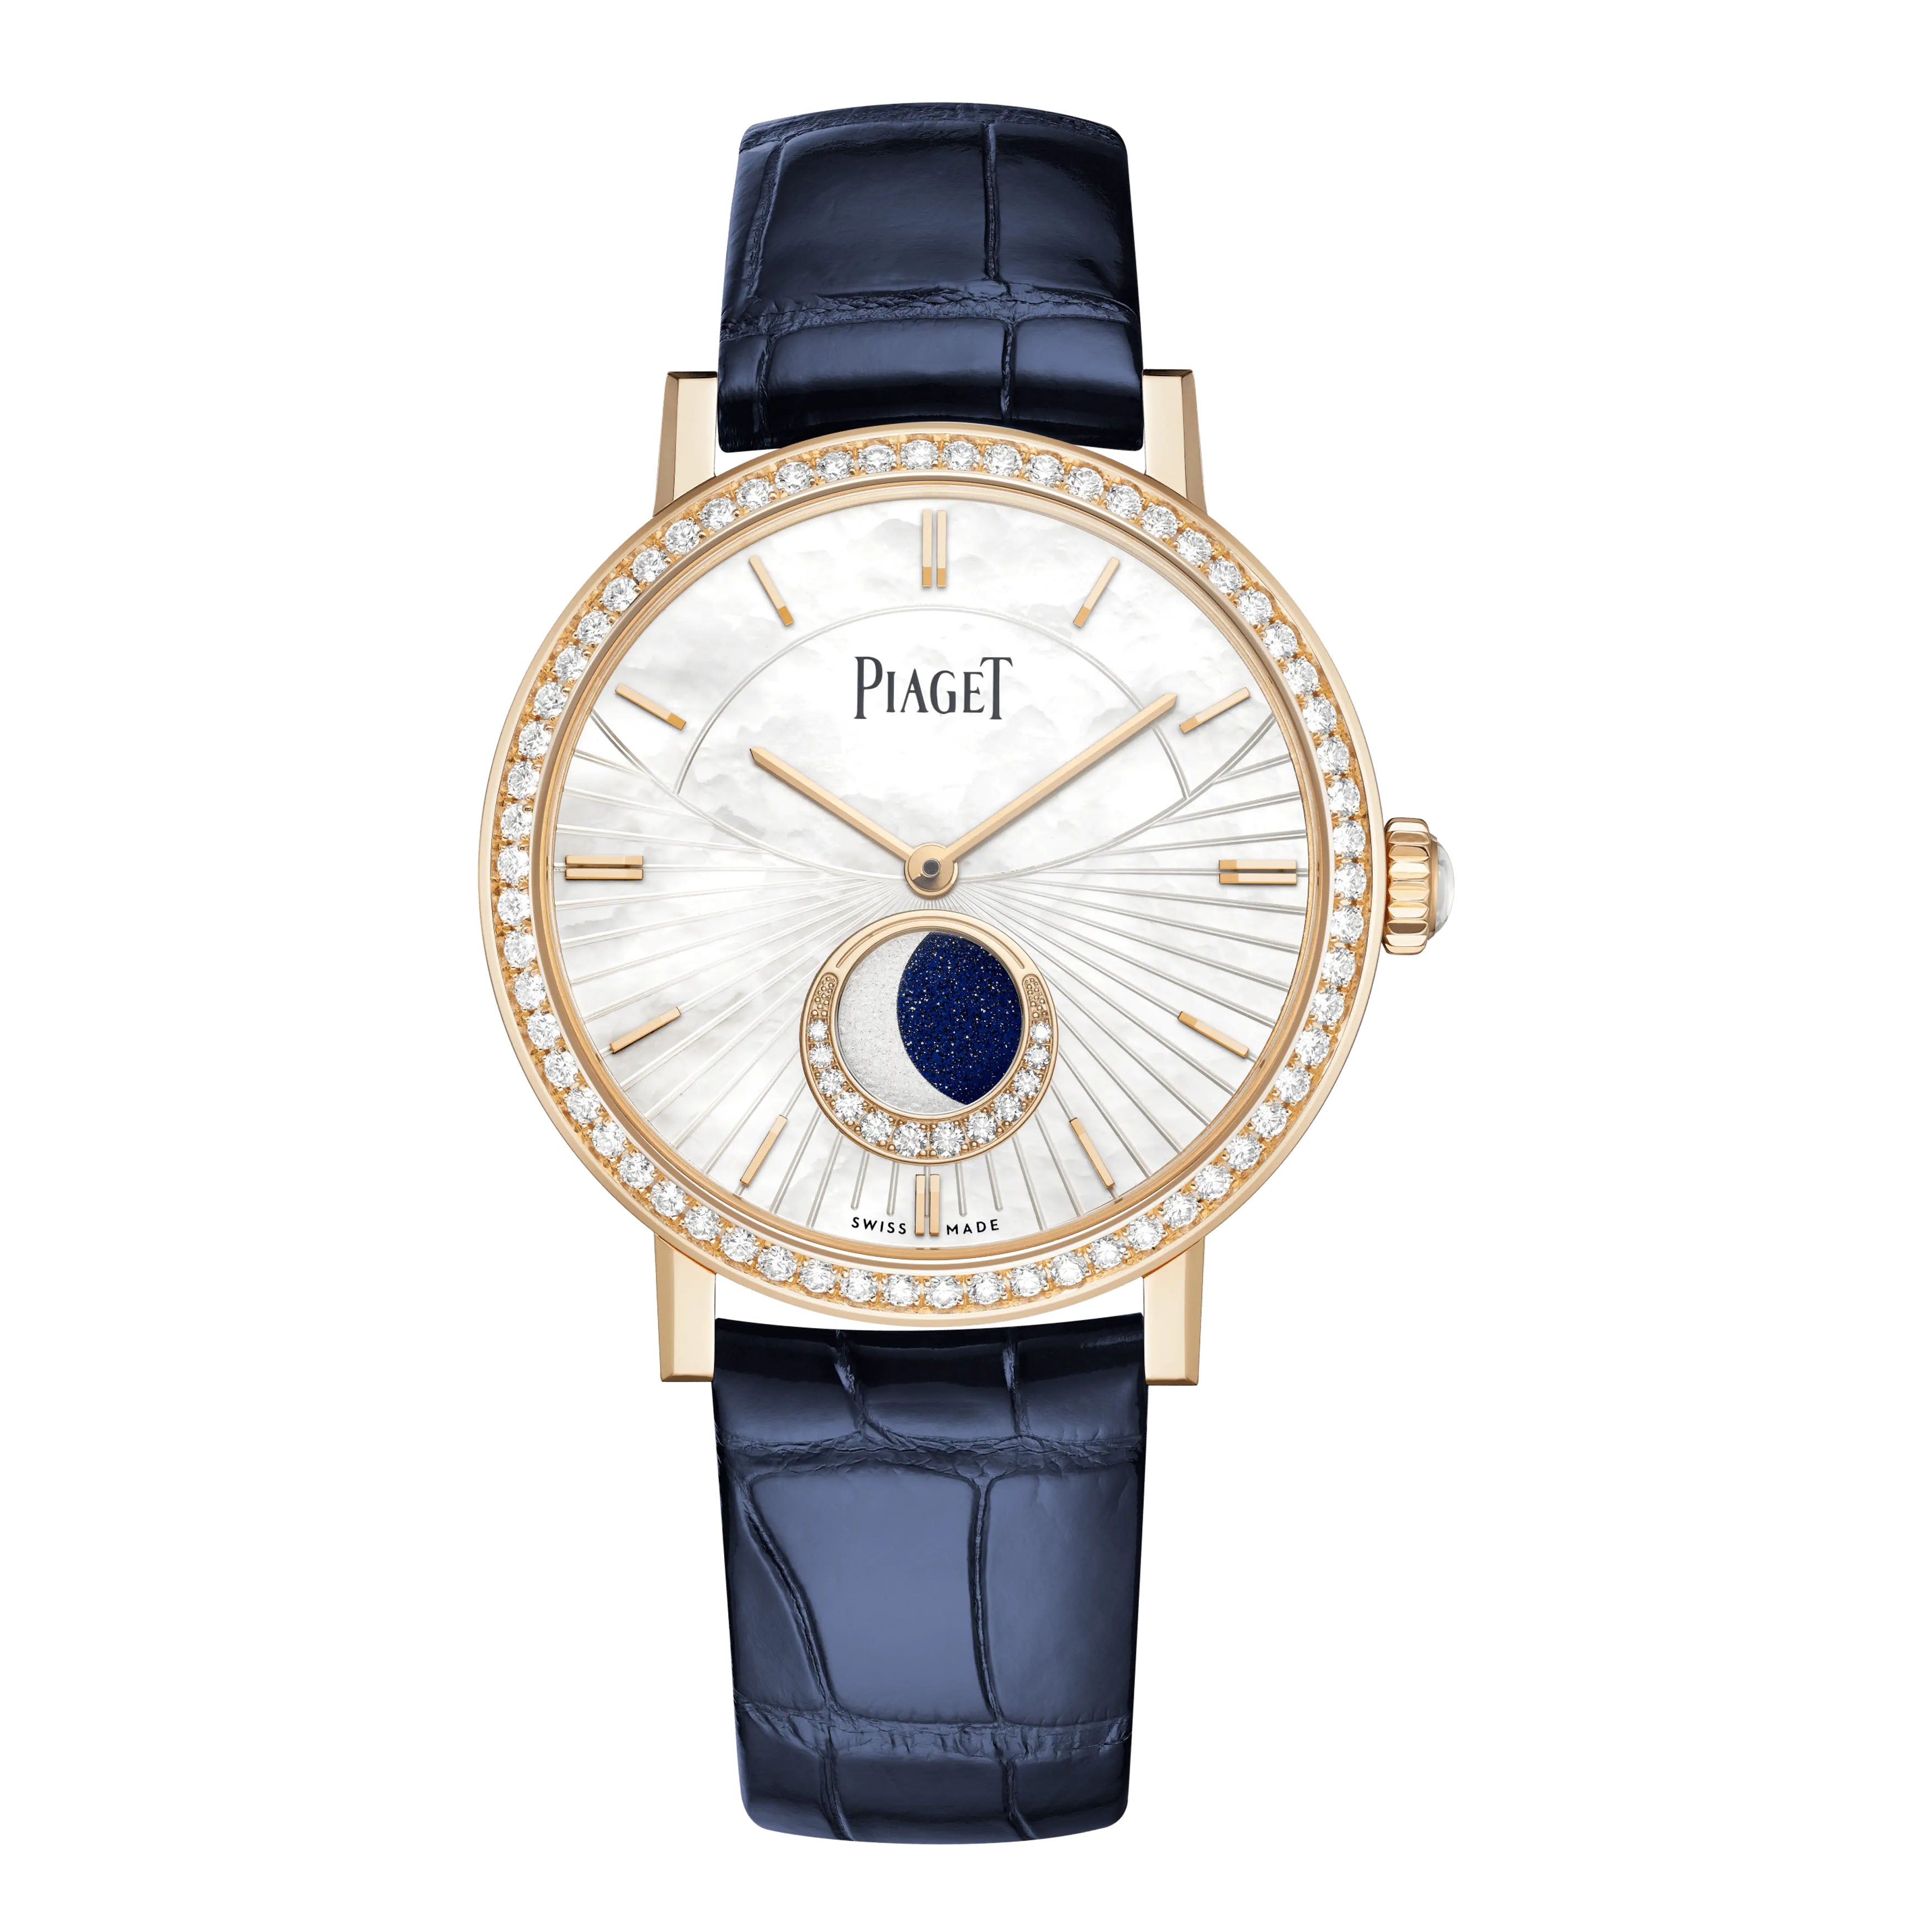 Piaget Altiplano Moonphase Watch, 36mm Mother of Pearl Dial, G0A47104